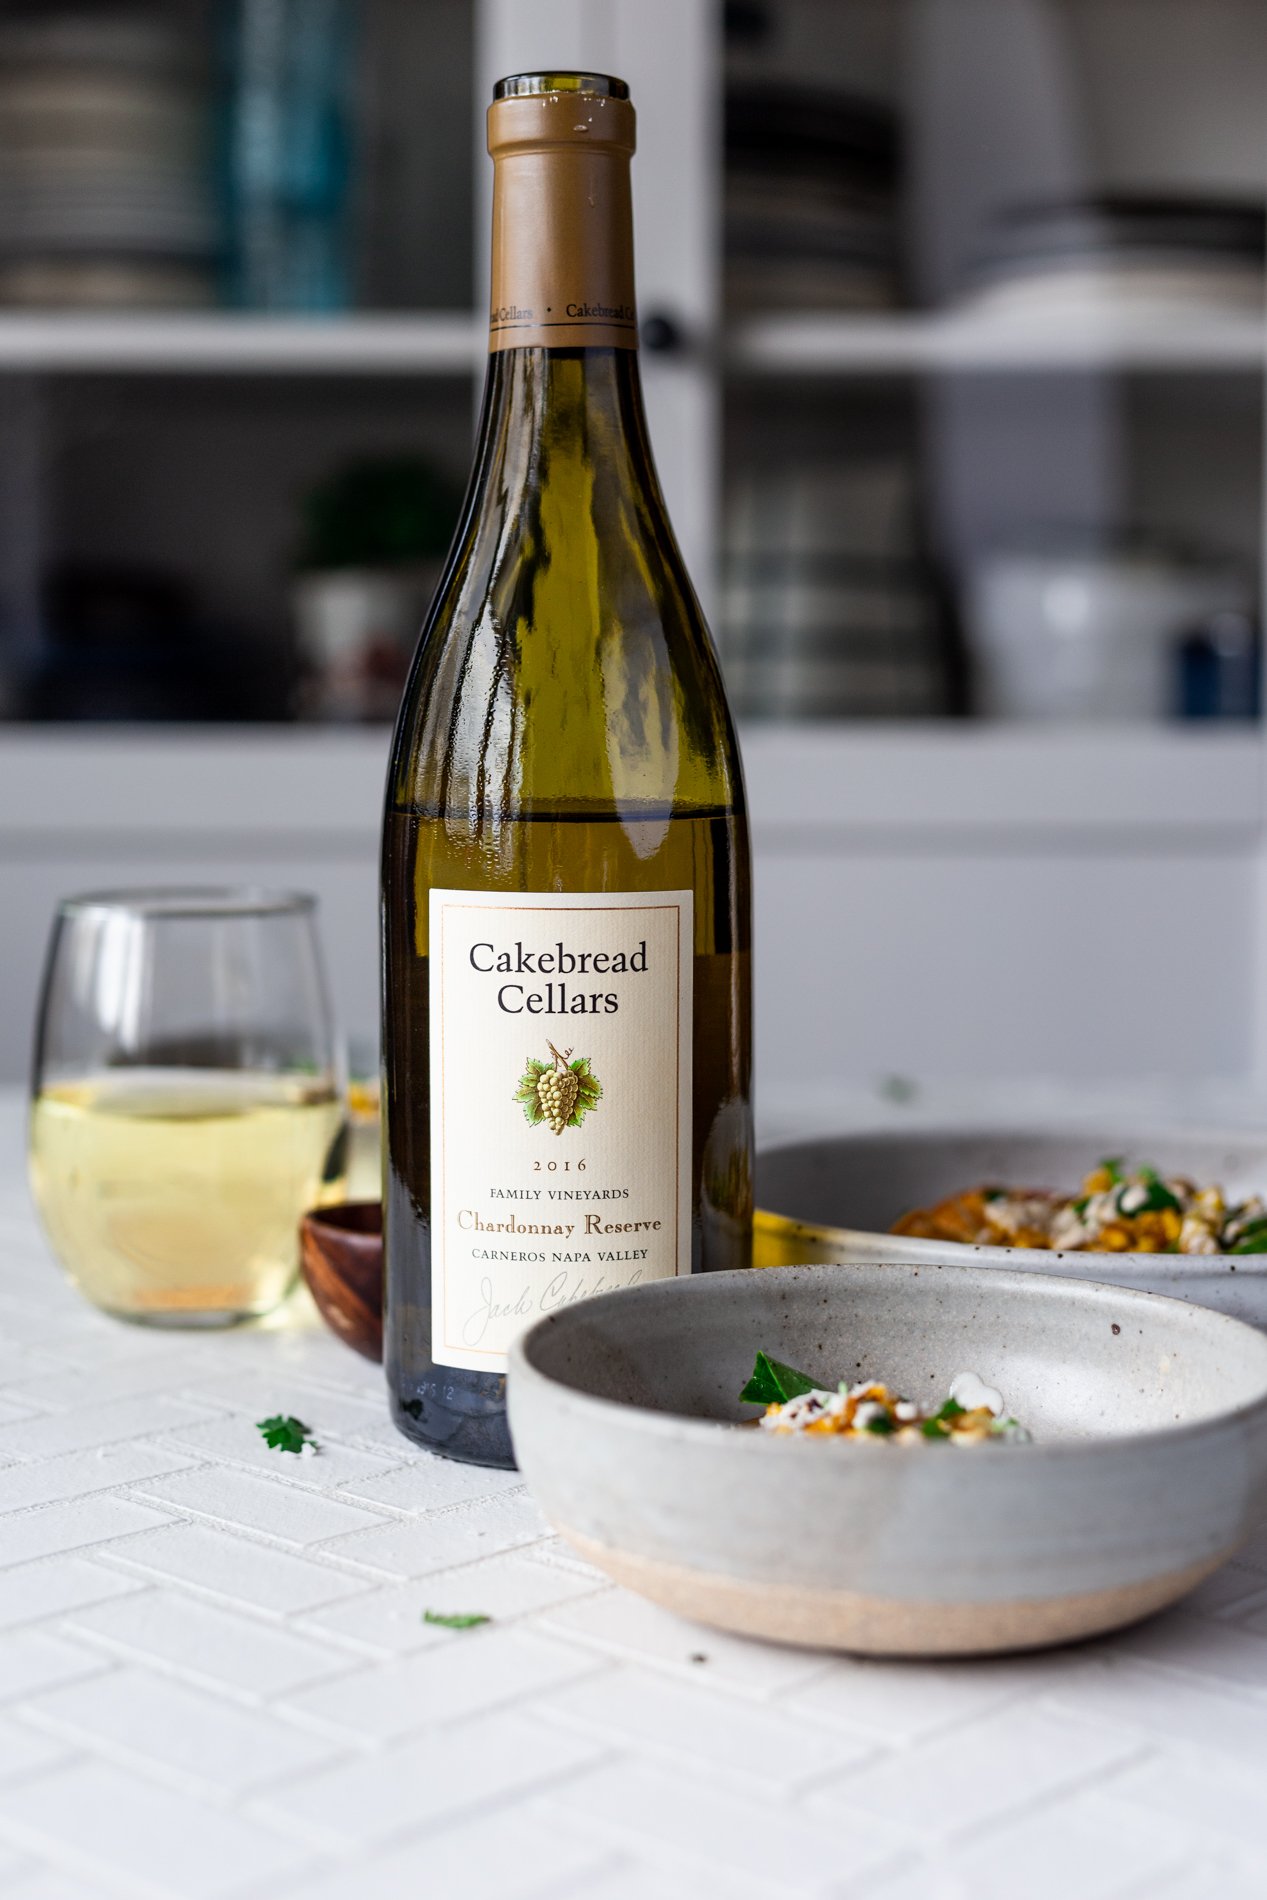 straight-ahead view of a bottle of Cakebread Cellars Chardonnay Reserve surrounded by bowls of mexican street corn salad and a glass of wine